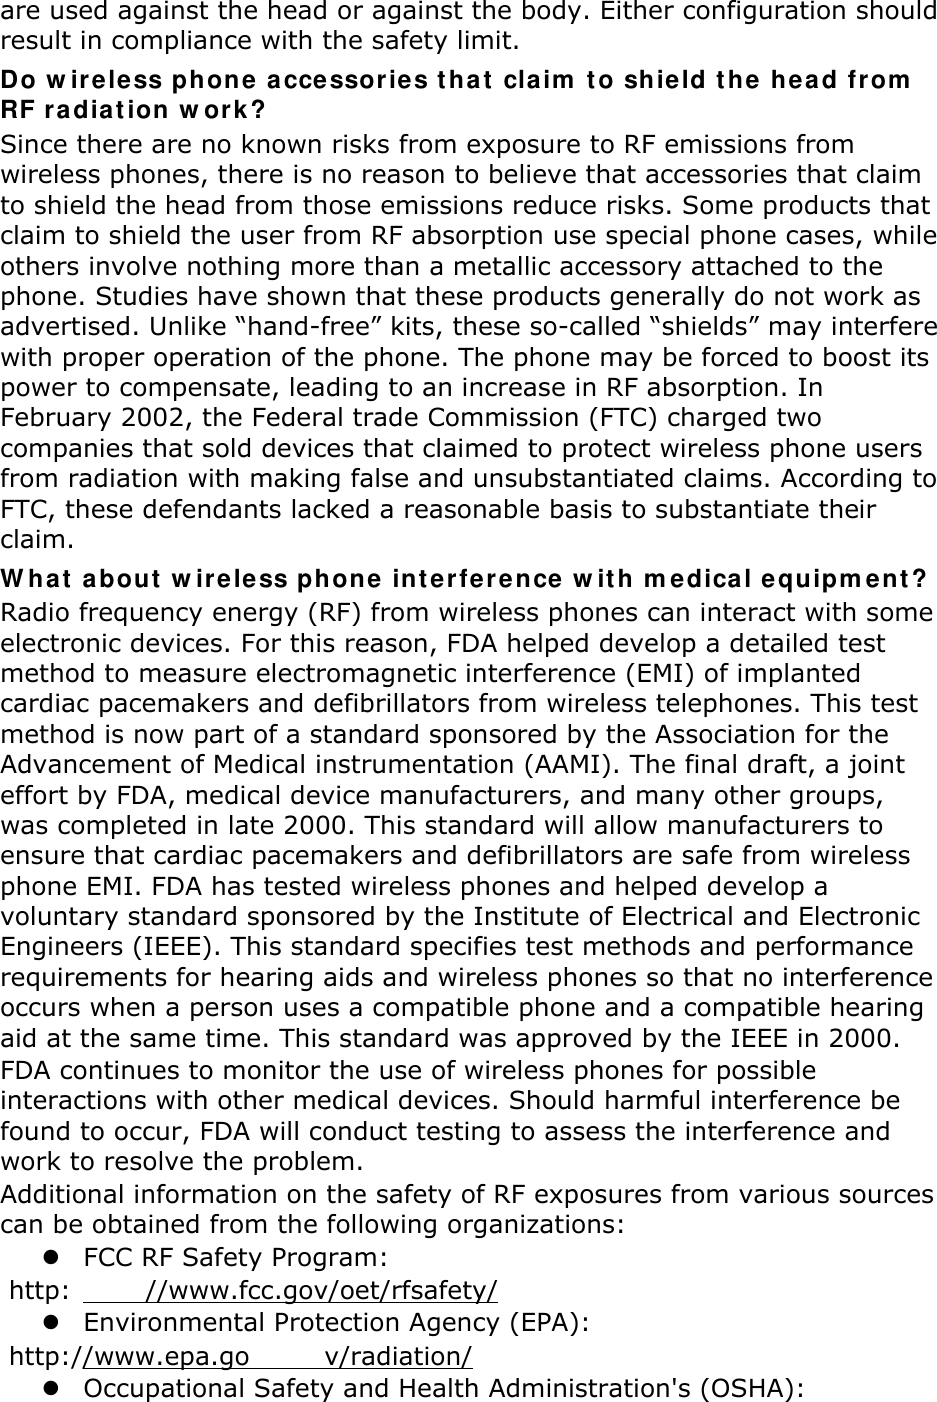 are used against the head or against the body. Either configuration should result in compliance with the safety limit. Do wireless phone accessories that claim to shield the head from RF radiation work? Since there are no known risks from exposure to RF emissions from wireless phones, there is no reason to believe that accessories that claim to shield the head from those emissions reduce risks. Some products that claim to shield the user from RF absorption use special phone cases, while others involve nothing more than a metallic accessory attached to the phone. Studies have shown that these products generally do not work as advertised. Unlike “hand-free” kits, these so-called “shields” may interfere with proper operation of the phone. The phone may be forced to boost its power to compensate, leading to an increase in RF absorption. In February 2002, the Federal trade Commission (FTC) charged two companies that sold devices that claimed to protect wireless phone users from radiation with making false and unsubstantiated claims. According to FTC, these defendants lacked a reasonable basis to substantiate their claim. What about wireless phone interference with medical equipment? Radio frequency energy (RF) from wireless phones can interact with some electronic devices. For this reason, FDA helped develop a detailed test method to measure electromagnetic interference (EMI) of implanted cardiac pacemakers and defibrillators from wireless telephones. This test method is now part of a standard sponsored by the Association for the Advancement of Medical instrumentation (AAMI). The final draft, a joint effort by FDA, medical device manufacturers, and many other groups, was completed in late 2000. This standard will allow manufacturers to ensure that cardiac pacemakers and defibrillators are safe from wireless phone EMI. FDA has tested wireless phones and helped develop a voluntary standard sponsored by the Institute of Electrical and Electronic Engineers (IEEE). This standard specifies test methods and performance requirements for hearing aids and wireless phones so that no interference occurs when a person uses a compatible phone and a compatible hearing aid at the same time. This standard was approved by the IEEE in 2000. FDA continues to monitor the use of wireless phones for possible interactions with other medical devices. Should harmful interference be found to occur, FDA will conduct testing to assess the interference and work to resolve the problem. Additional information on the safety of RF exposures from various sources can be obtained from the following organizations:  FCC RF Safety Program:  http: //www.fcc.gov/oet/rfsafety/  Environmental Protection Agency (EPA):  http://www.epa.go v/radiation/  Occupational Safety and Health Administration&apos;s (OSHA):   